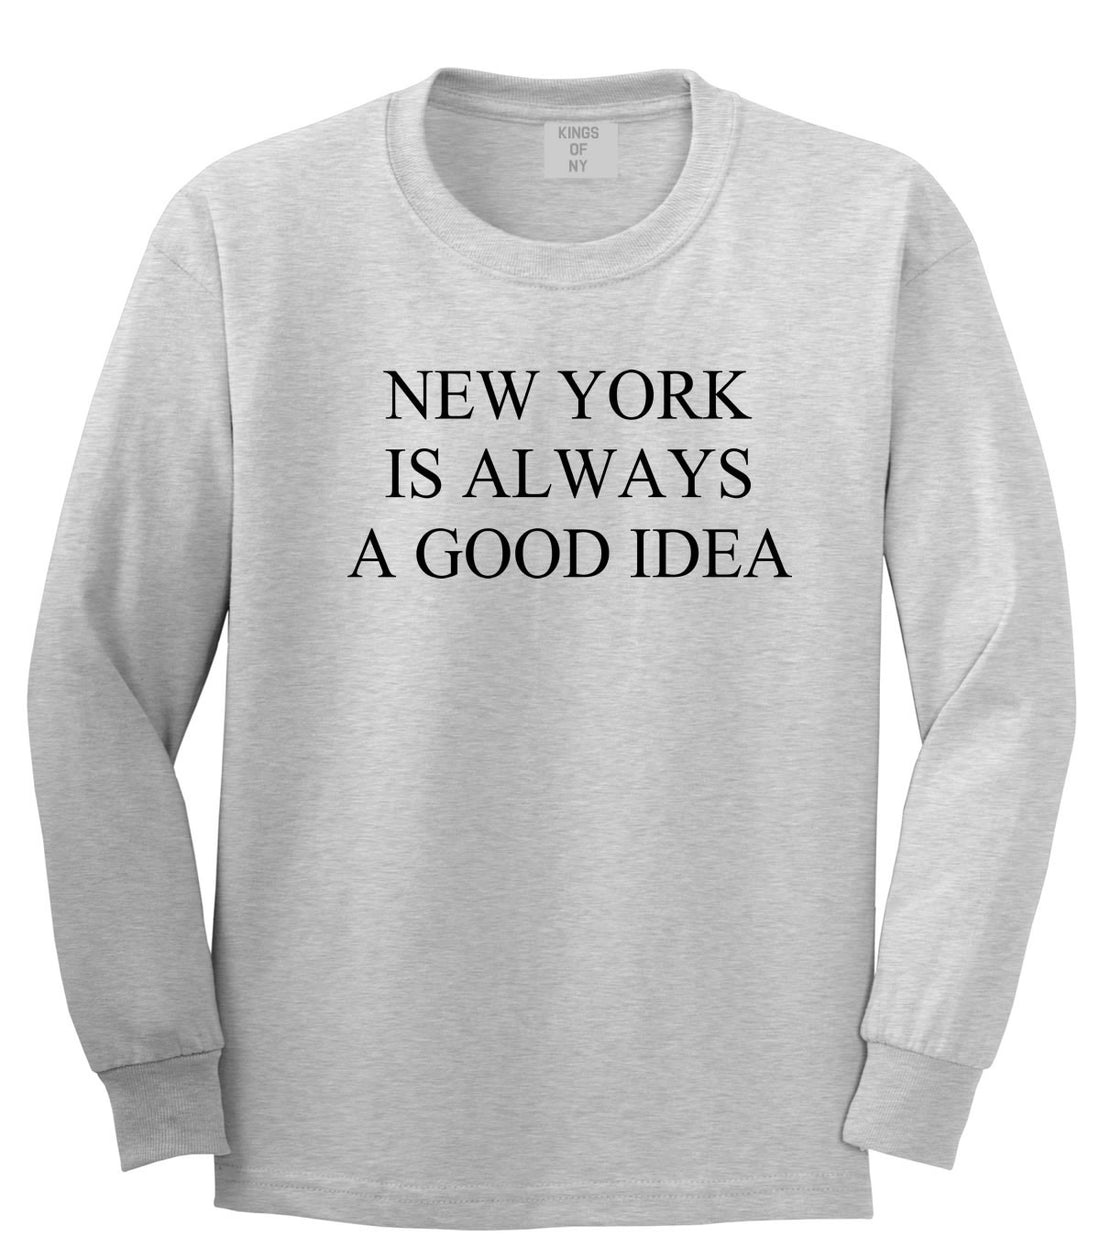 New York Is Always A Good Idea Long Sleeve T-Shirt in Grey by Kings Of NY